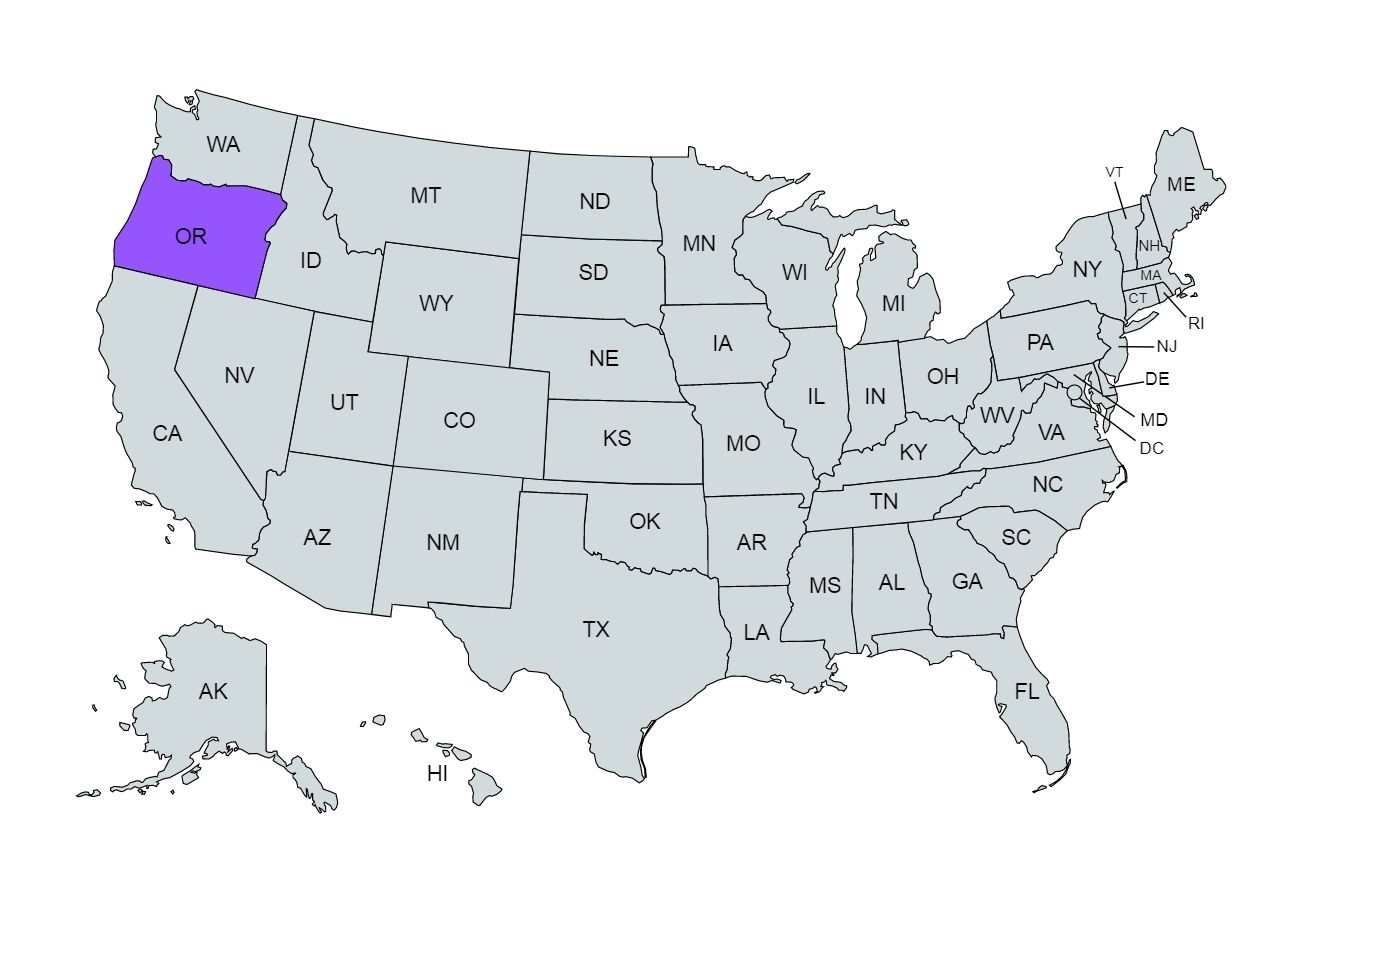 The US map with the Oregon state marked in purple